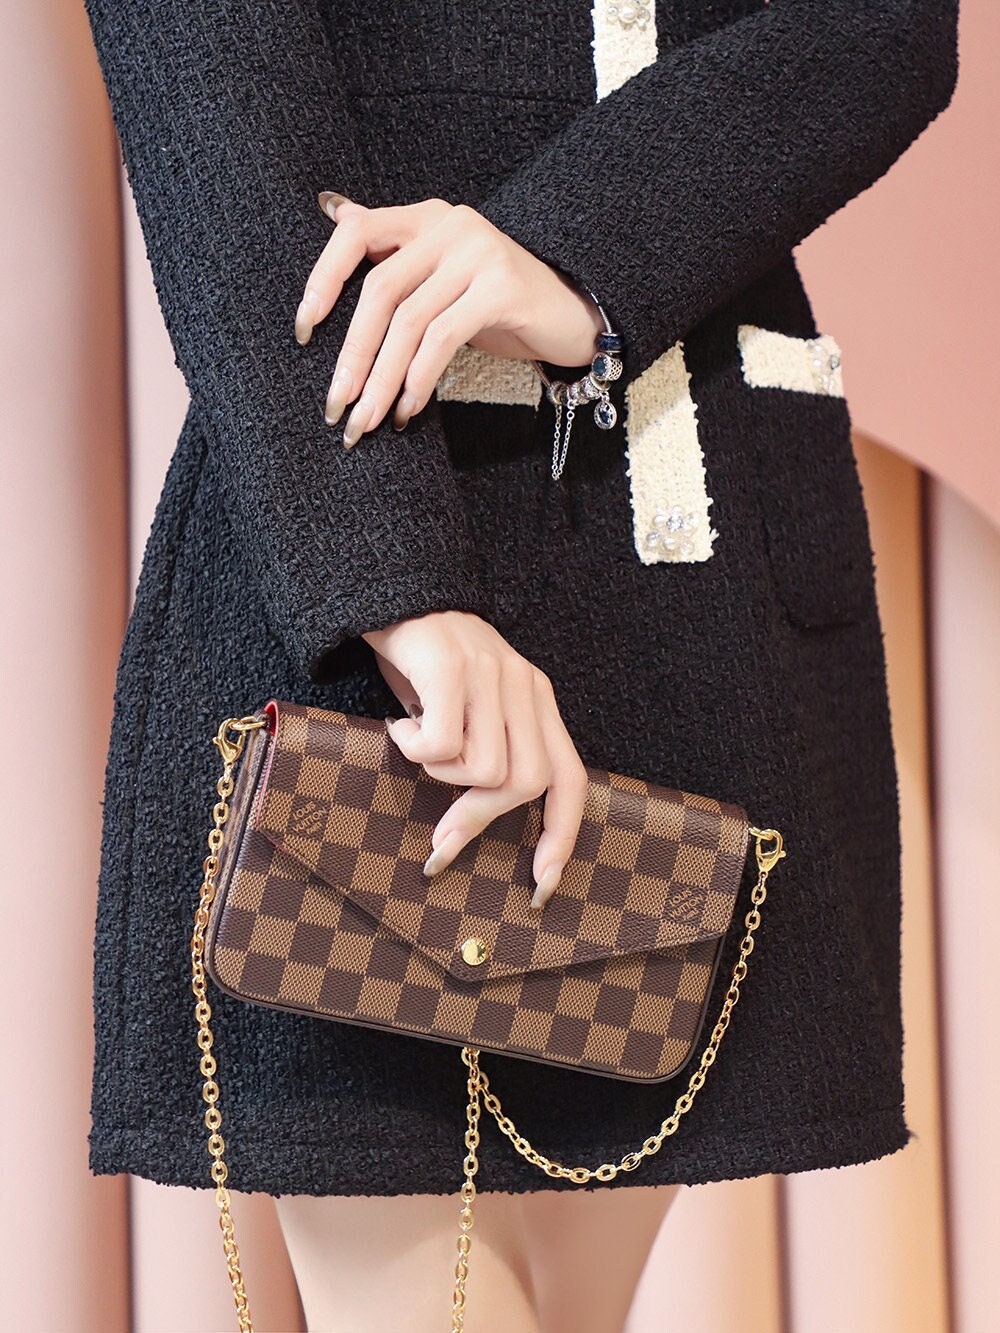 Anyone know where I can find a good quality Louis Vuitton Pochette  Accessoires (Monogram Canvas) handbag, from a trusted seller, like this one  please? : r/DHgate